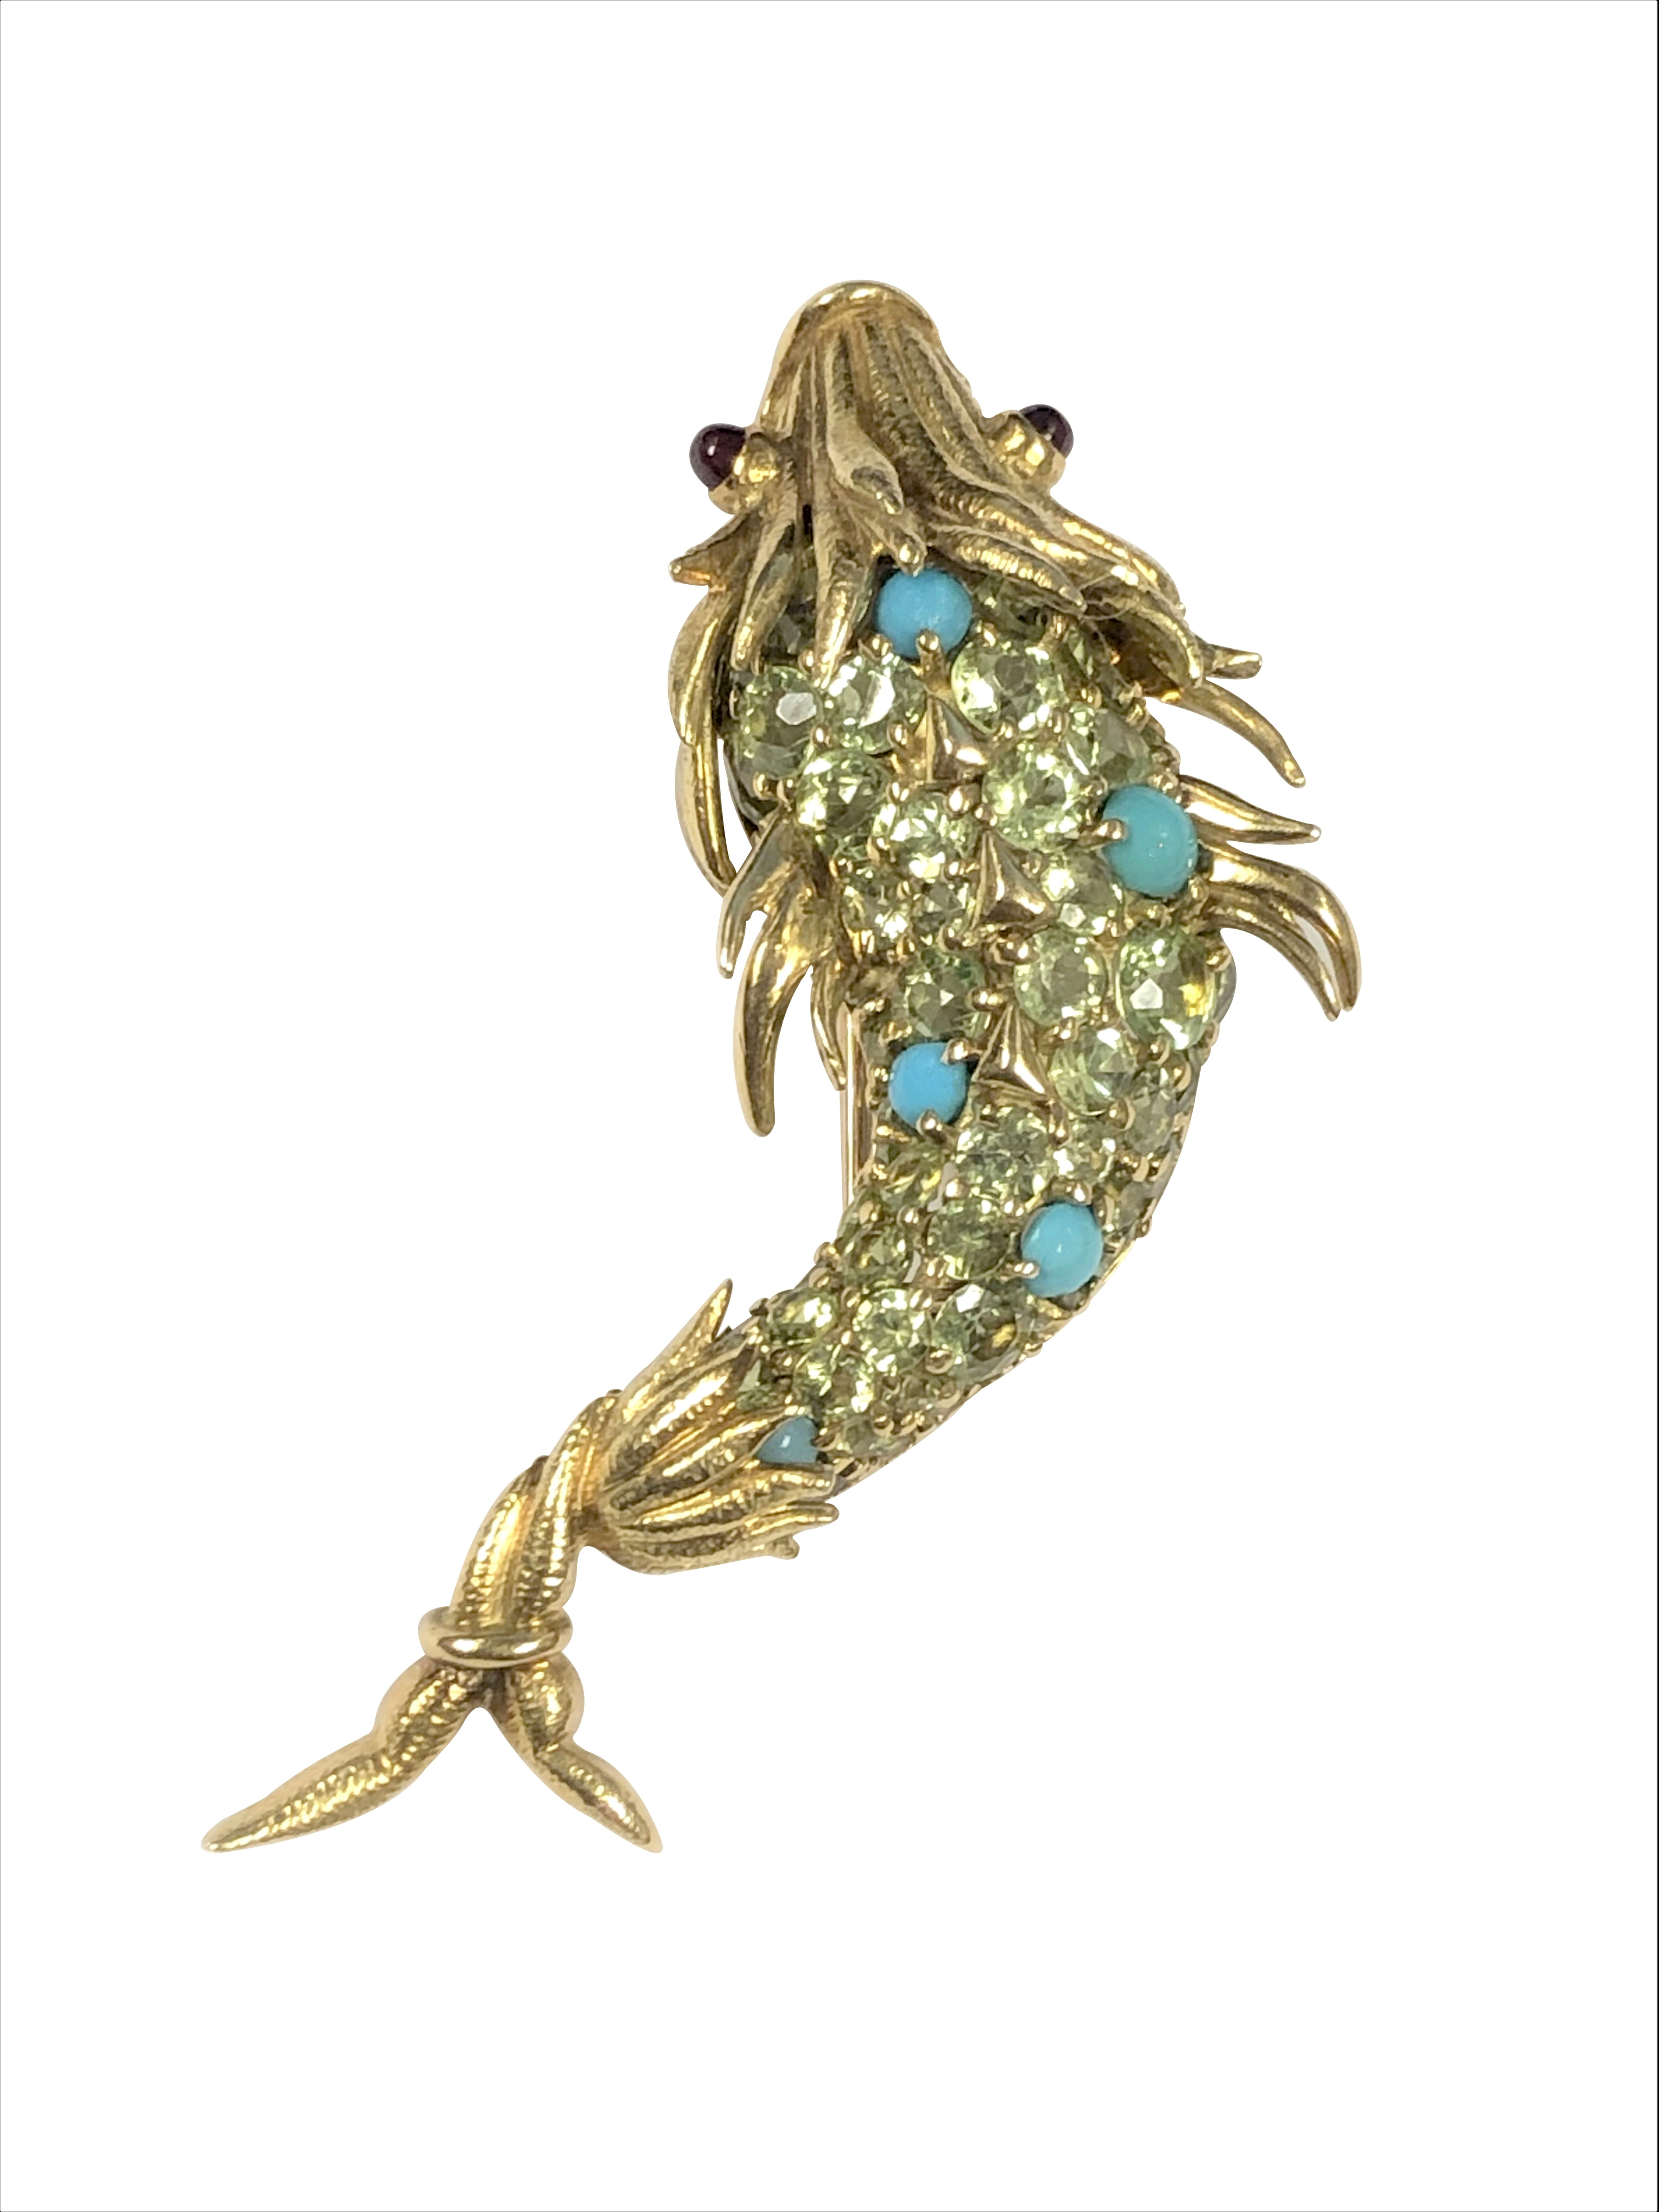 Circa 1970 Jean Schlumberger for Tiffany & Company 18K Yellow Gold Fish Brooch, measuring 2 3/8 inches in length and 1 inch wide. Set with light Green Peridots, Turquoise and Cabochon Ruby Eyes. Having a Double Clip Pin attachment. 